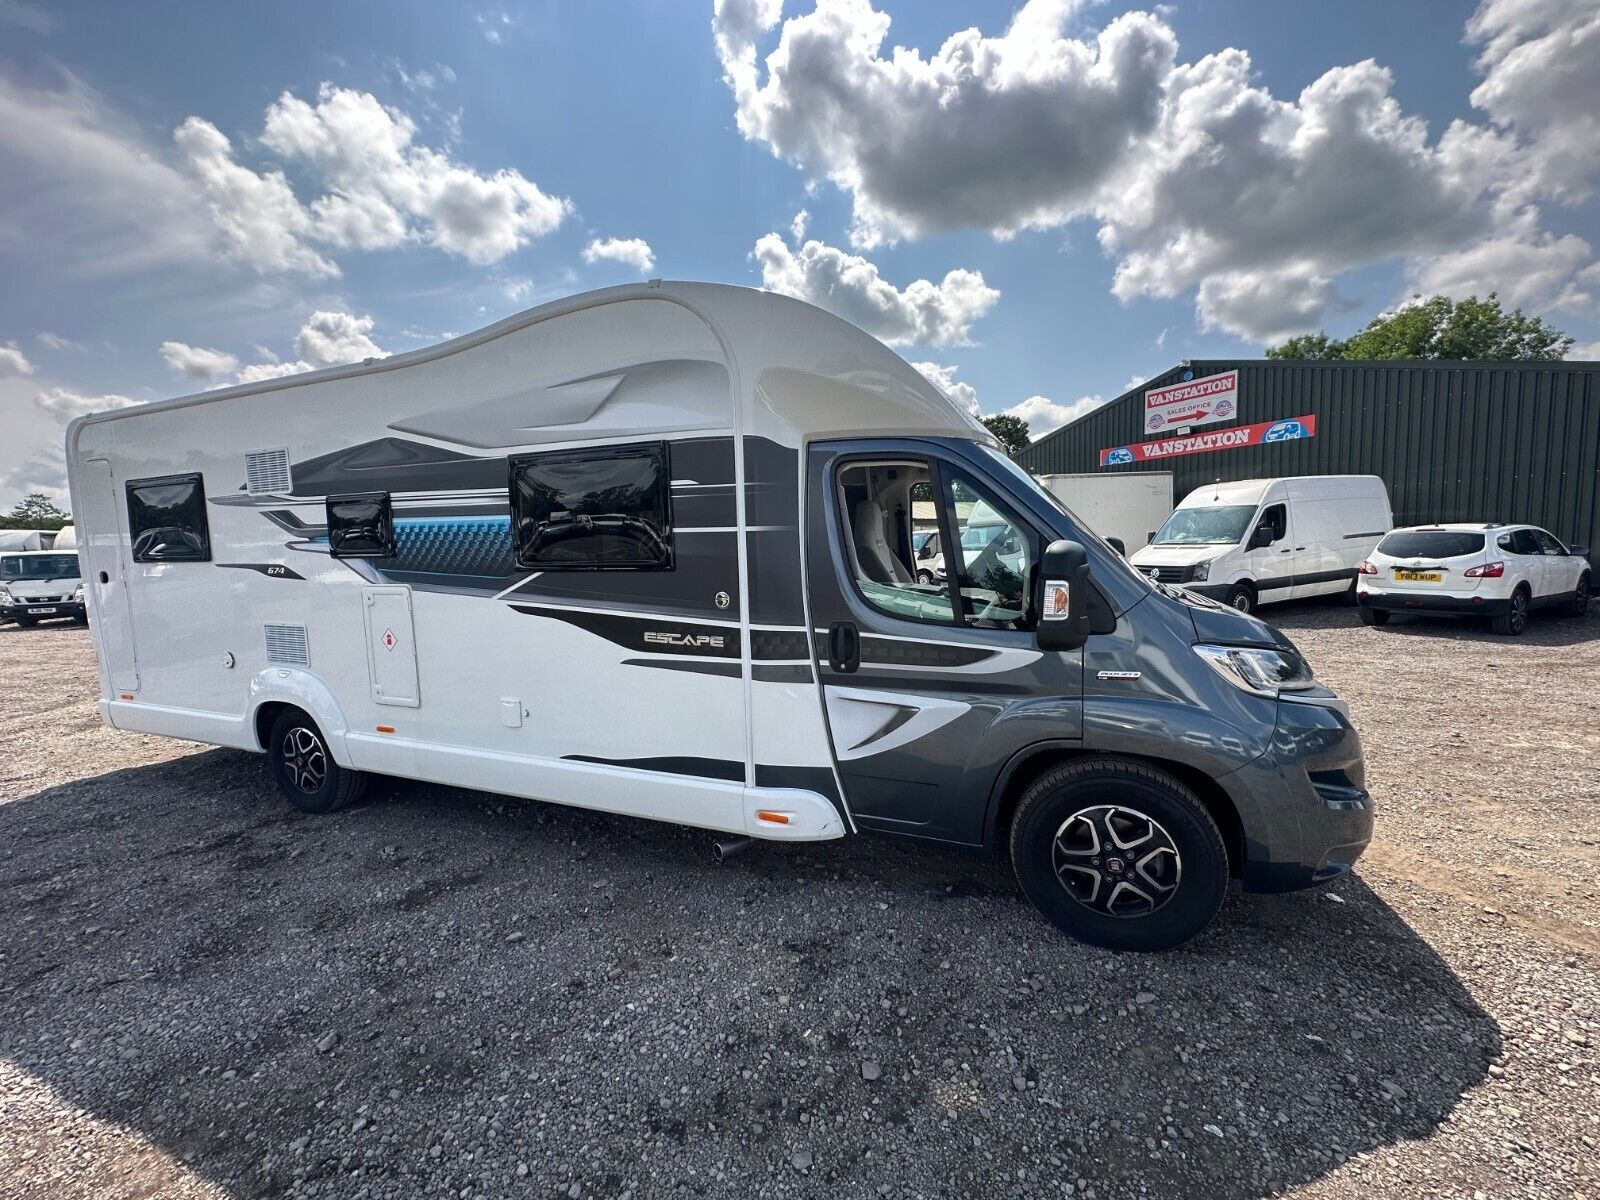 Bid on RESERVE REDUCED! ALMOST NEW 2022 FIAT SWIFT ESCAPE 674 S-A AUTOMATIC MOTORHOME - MILEAGE 1,485- Buy &amp; Sell on Auction with EAMA Group